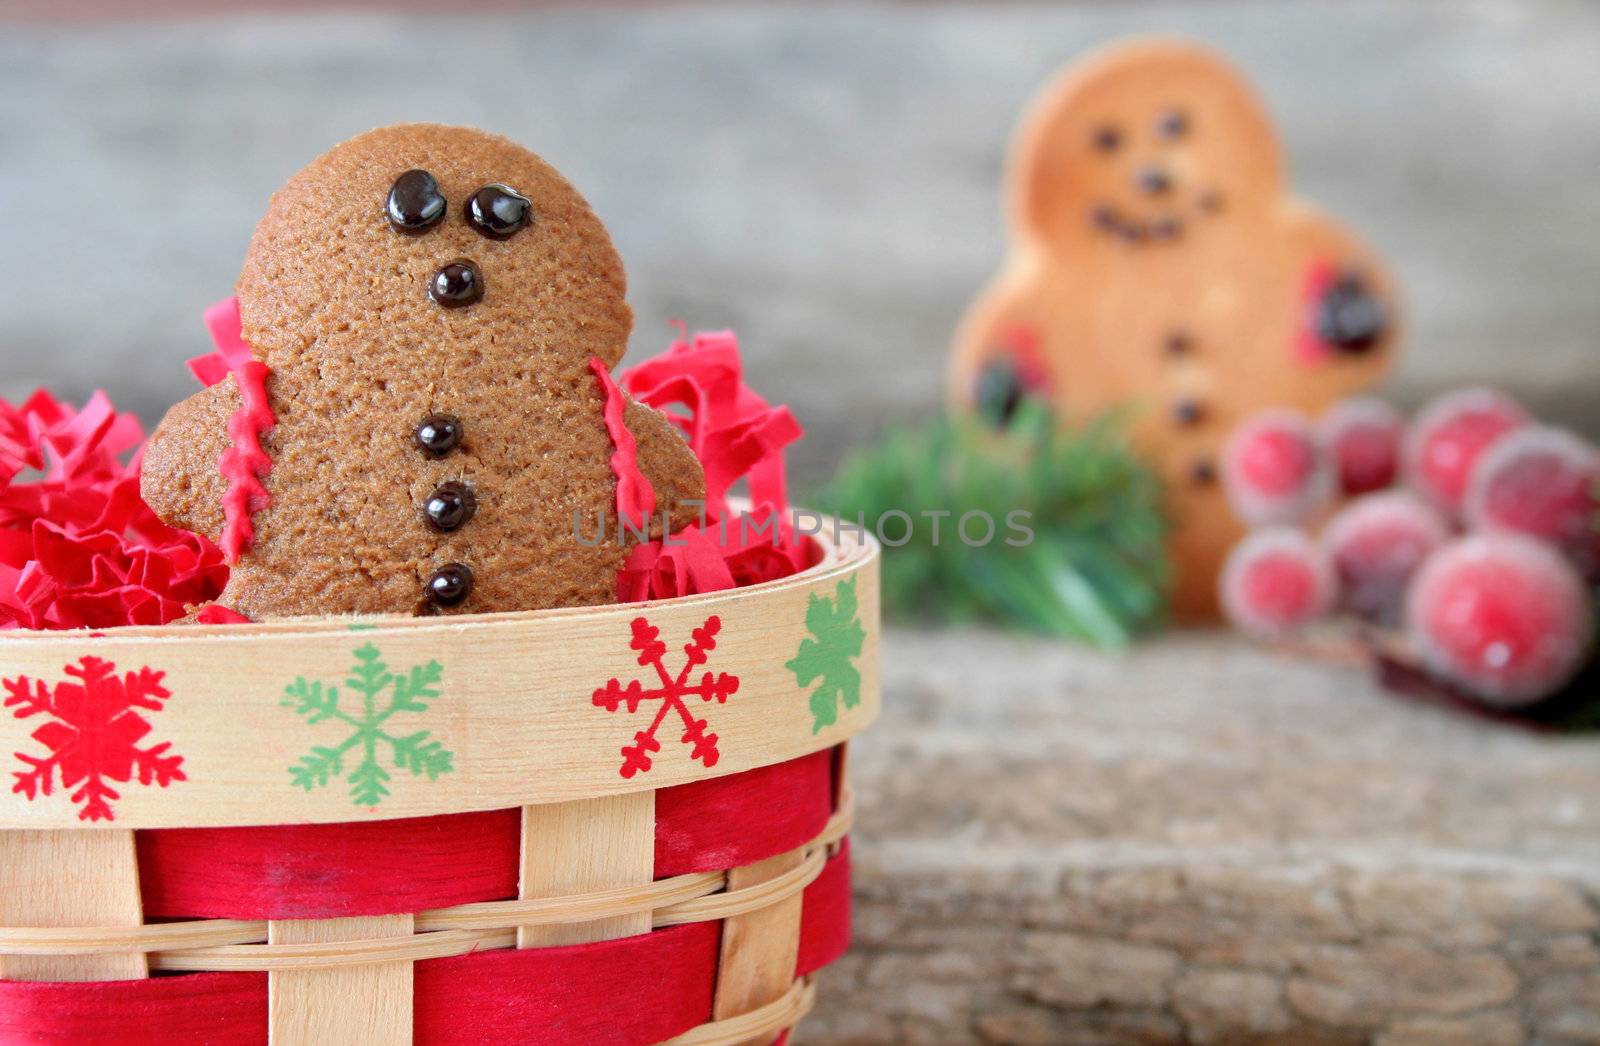 Gingerbread Man by thephotoguy